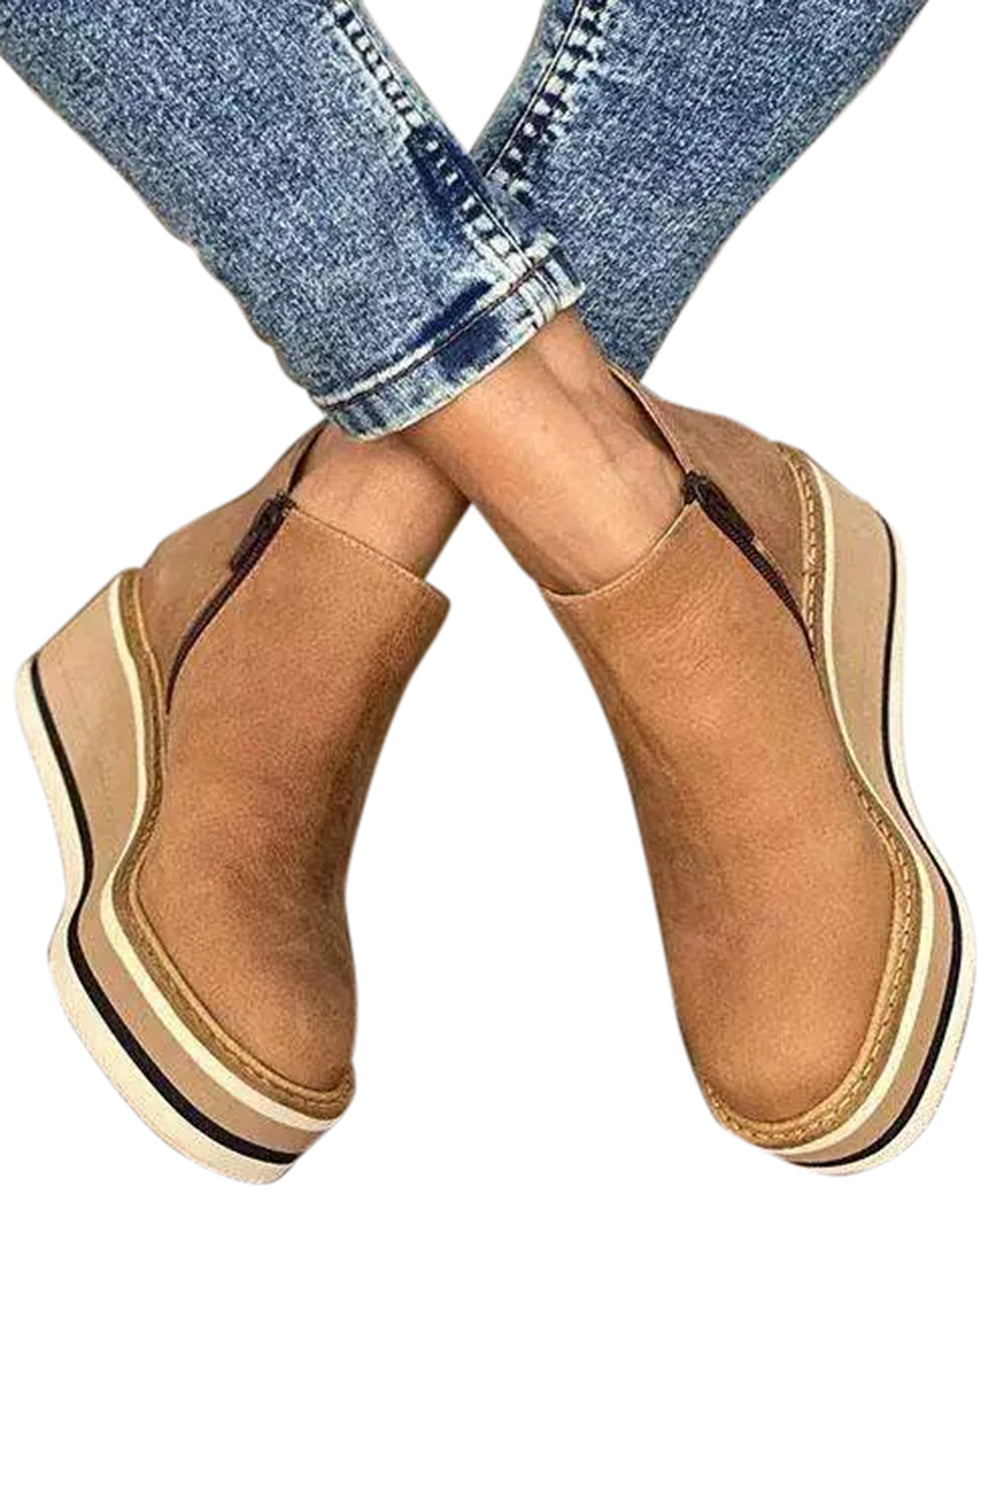 LC12665-16-37, LC12665-16-38, LC12665-16-39, LC12665-16-40, LC12665-16-41, Khaki Women's Ankle Boots Wedge Heel Booties Casual Shoes